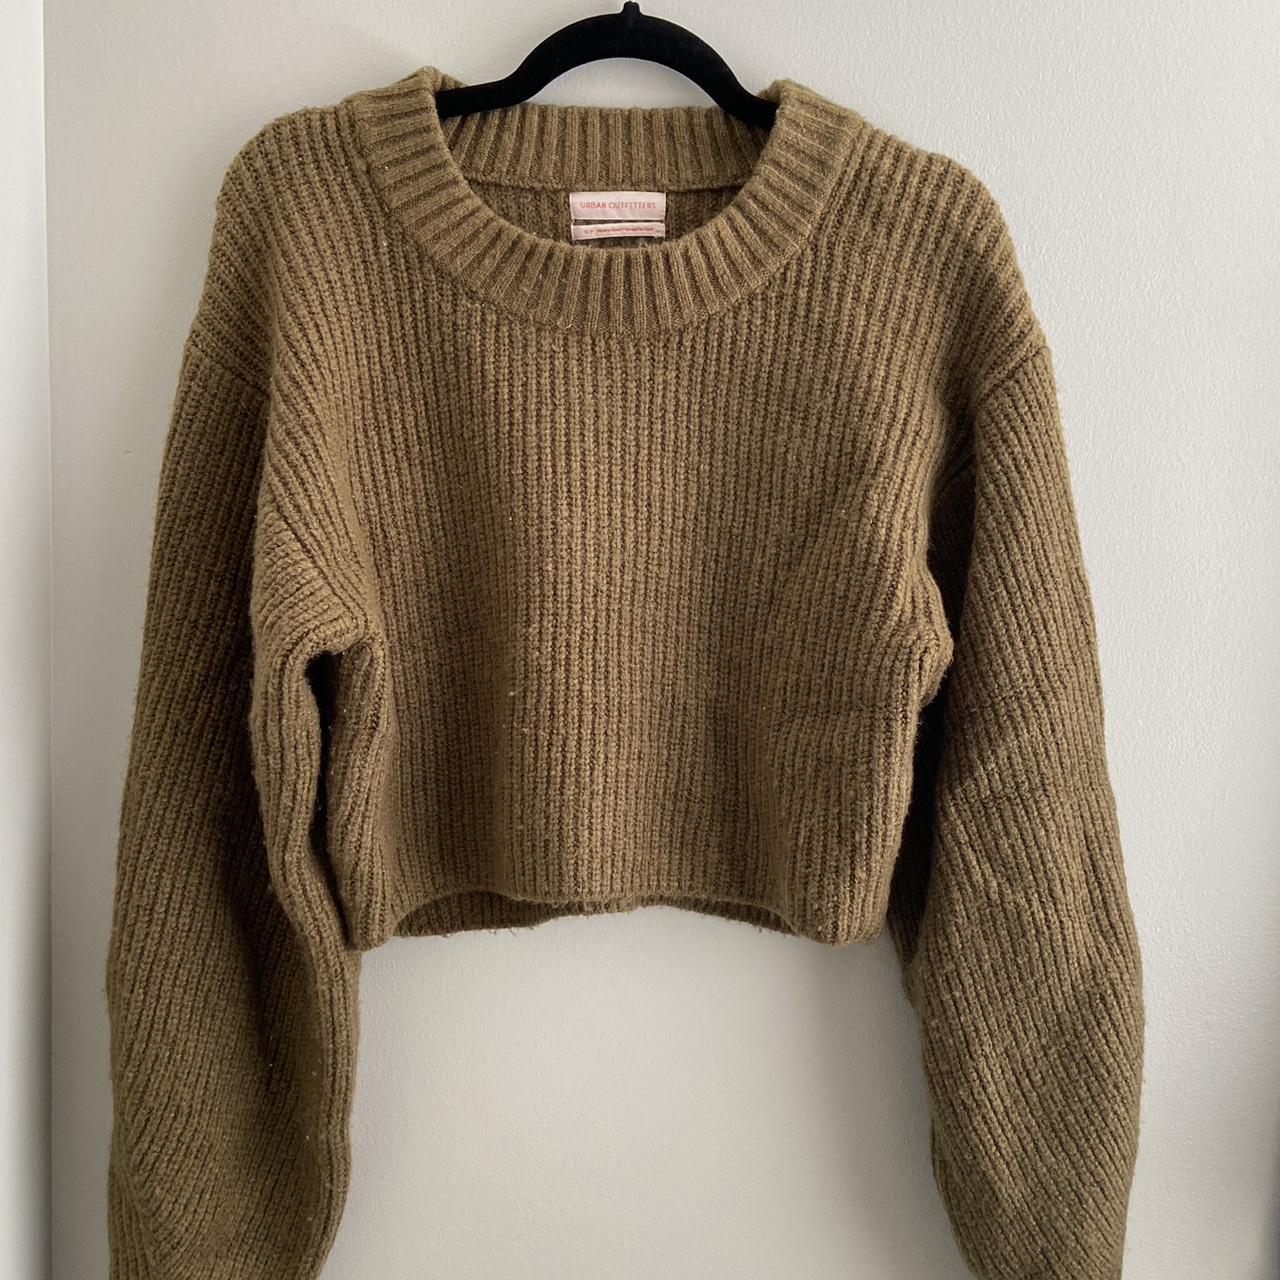 urban outfitters green drop shoulder sweater size s - Depop